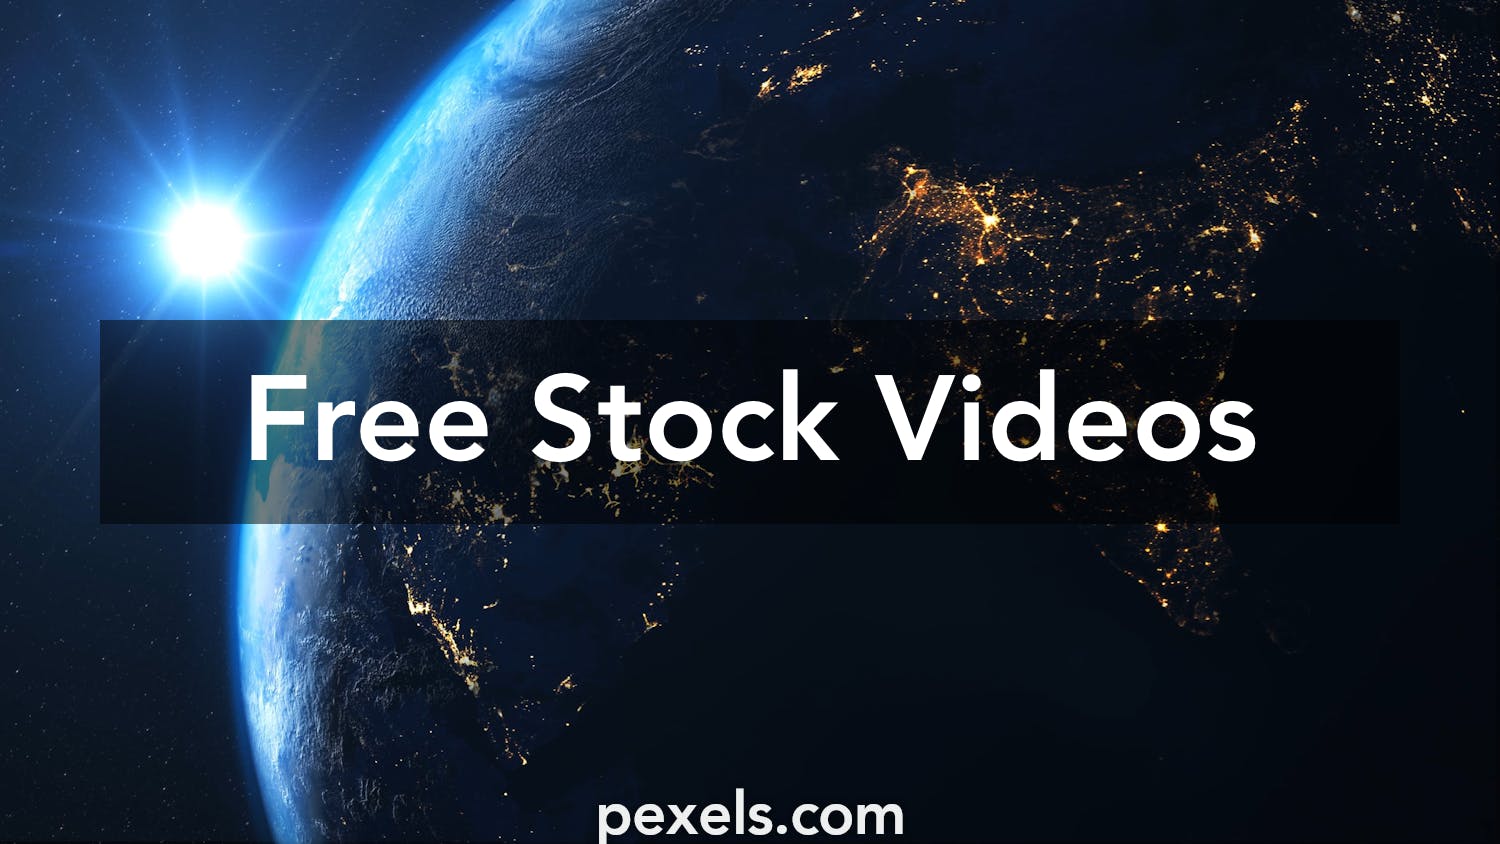 5 Second Stock Video Footage for Free Download